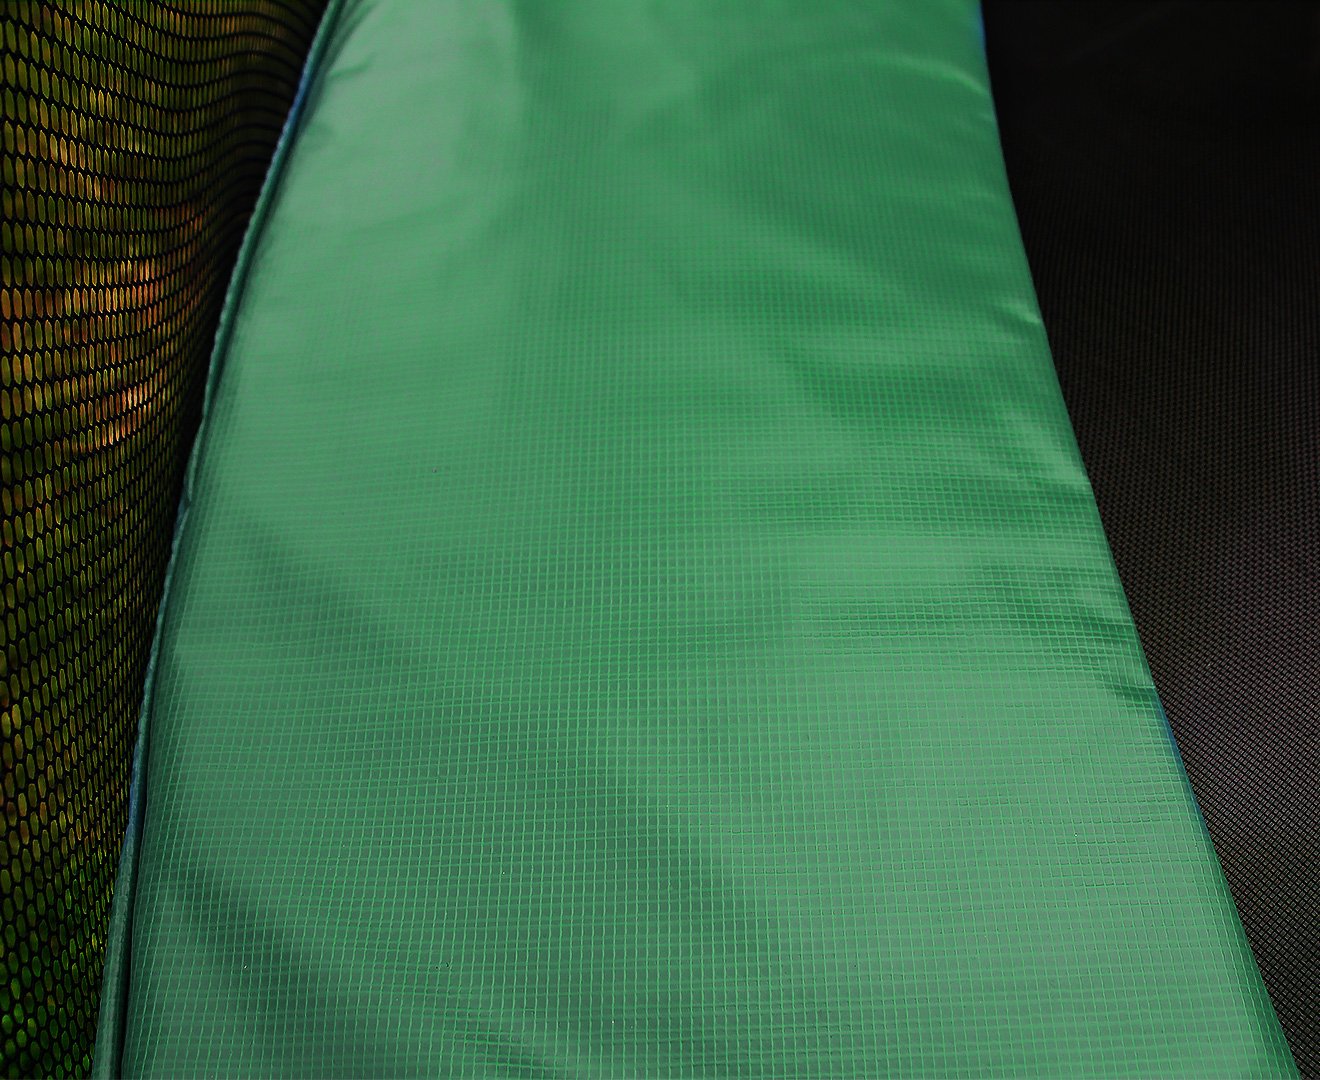 08ft Trampoline Replacement Safety Pad and Net Round 6 Poles Green